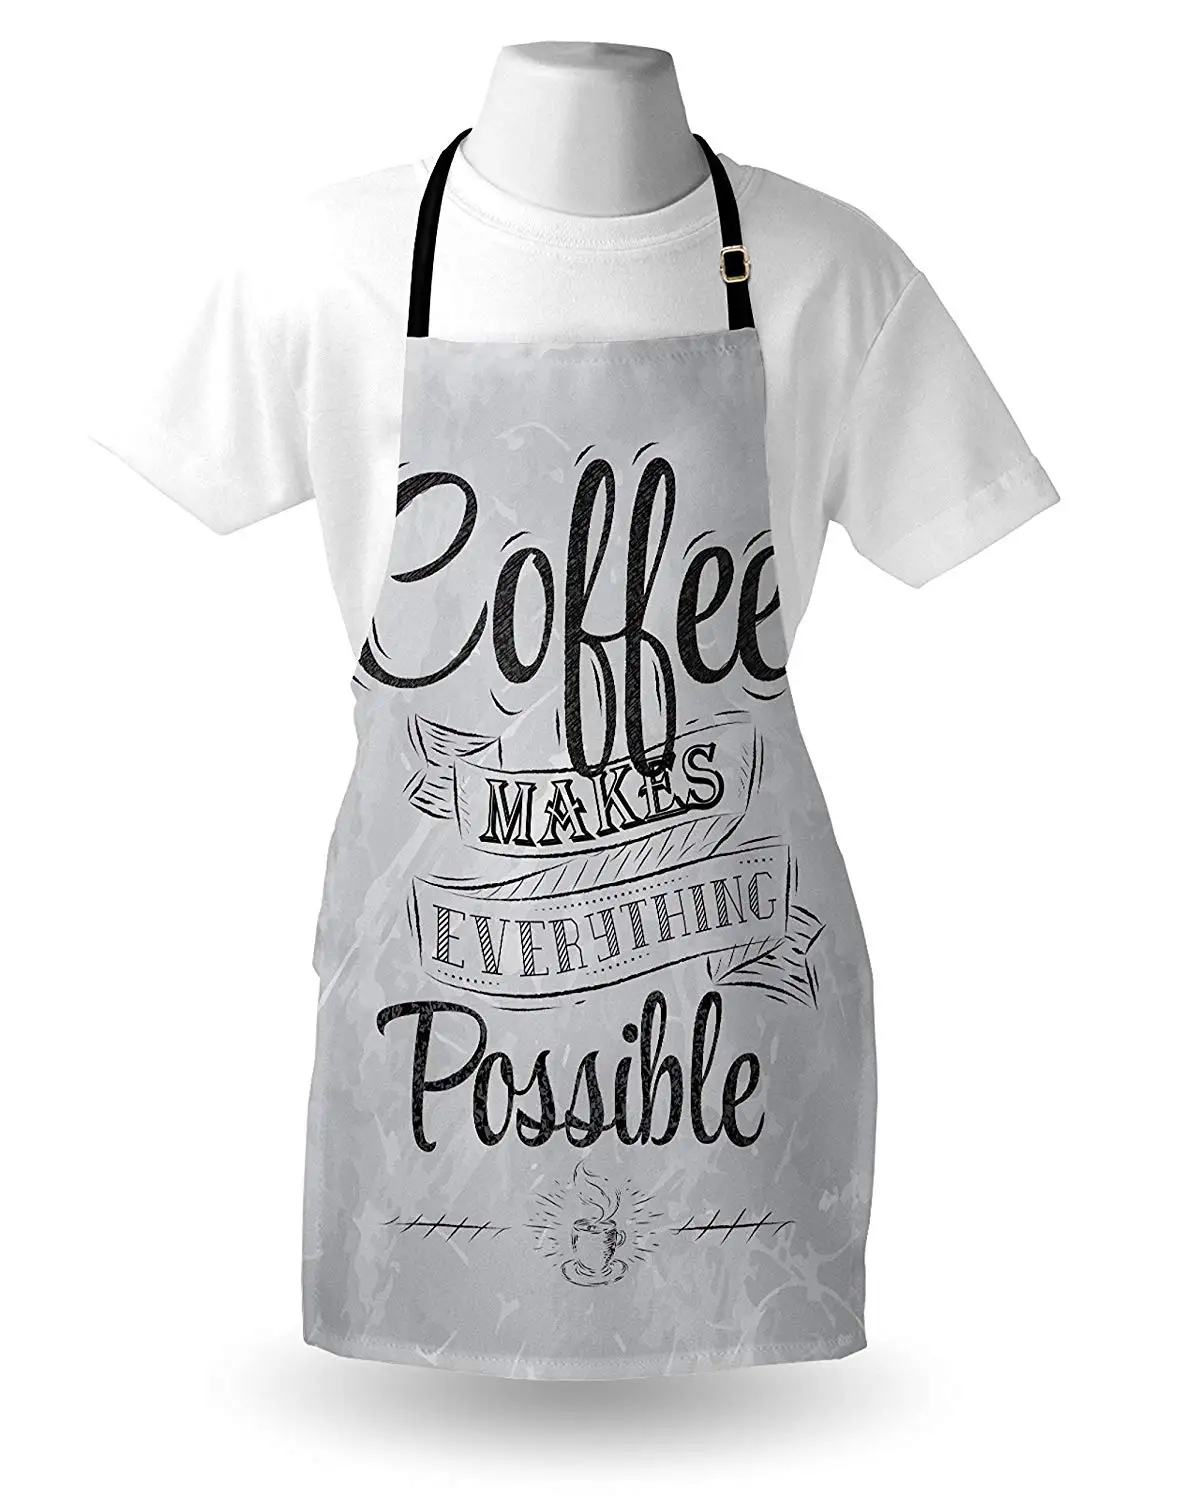 Coffee Apron Makes Everything Possible Quote Art Lifestyle Inspiration Idea Design Kitchen Bib for Cooking Baking | Дом и сад